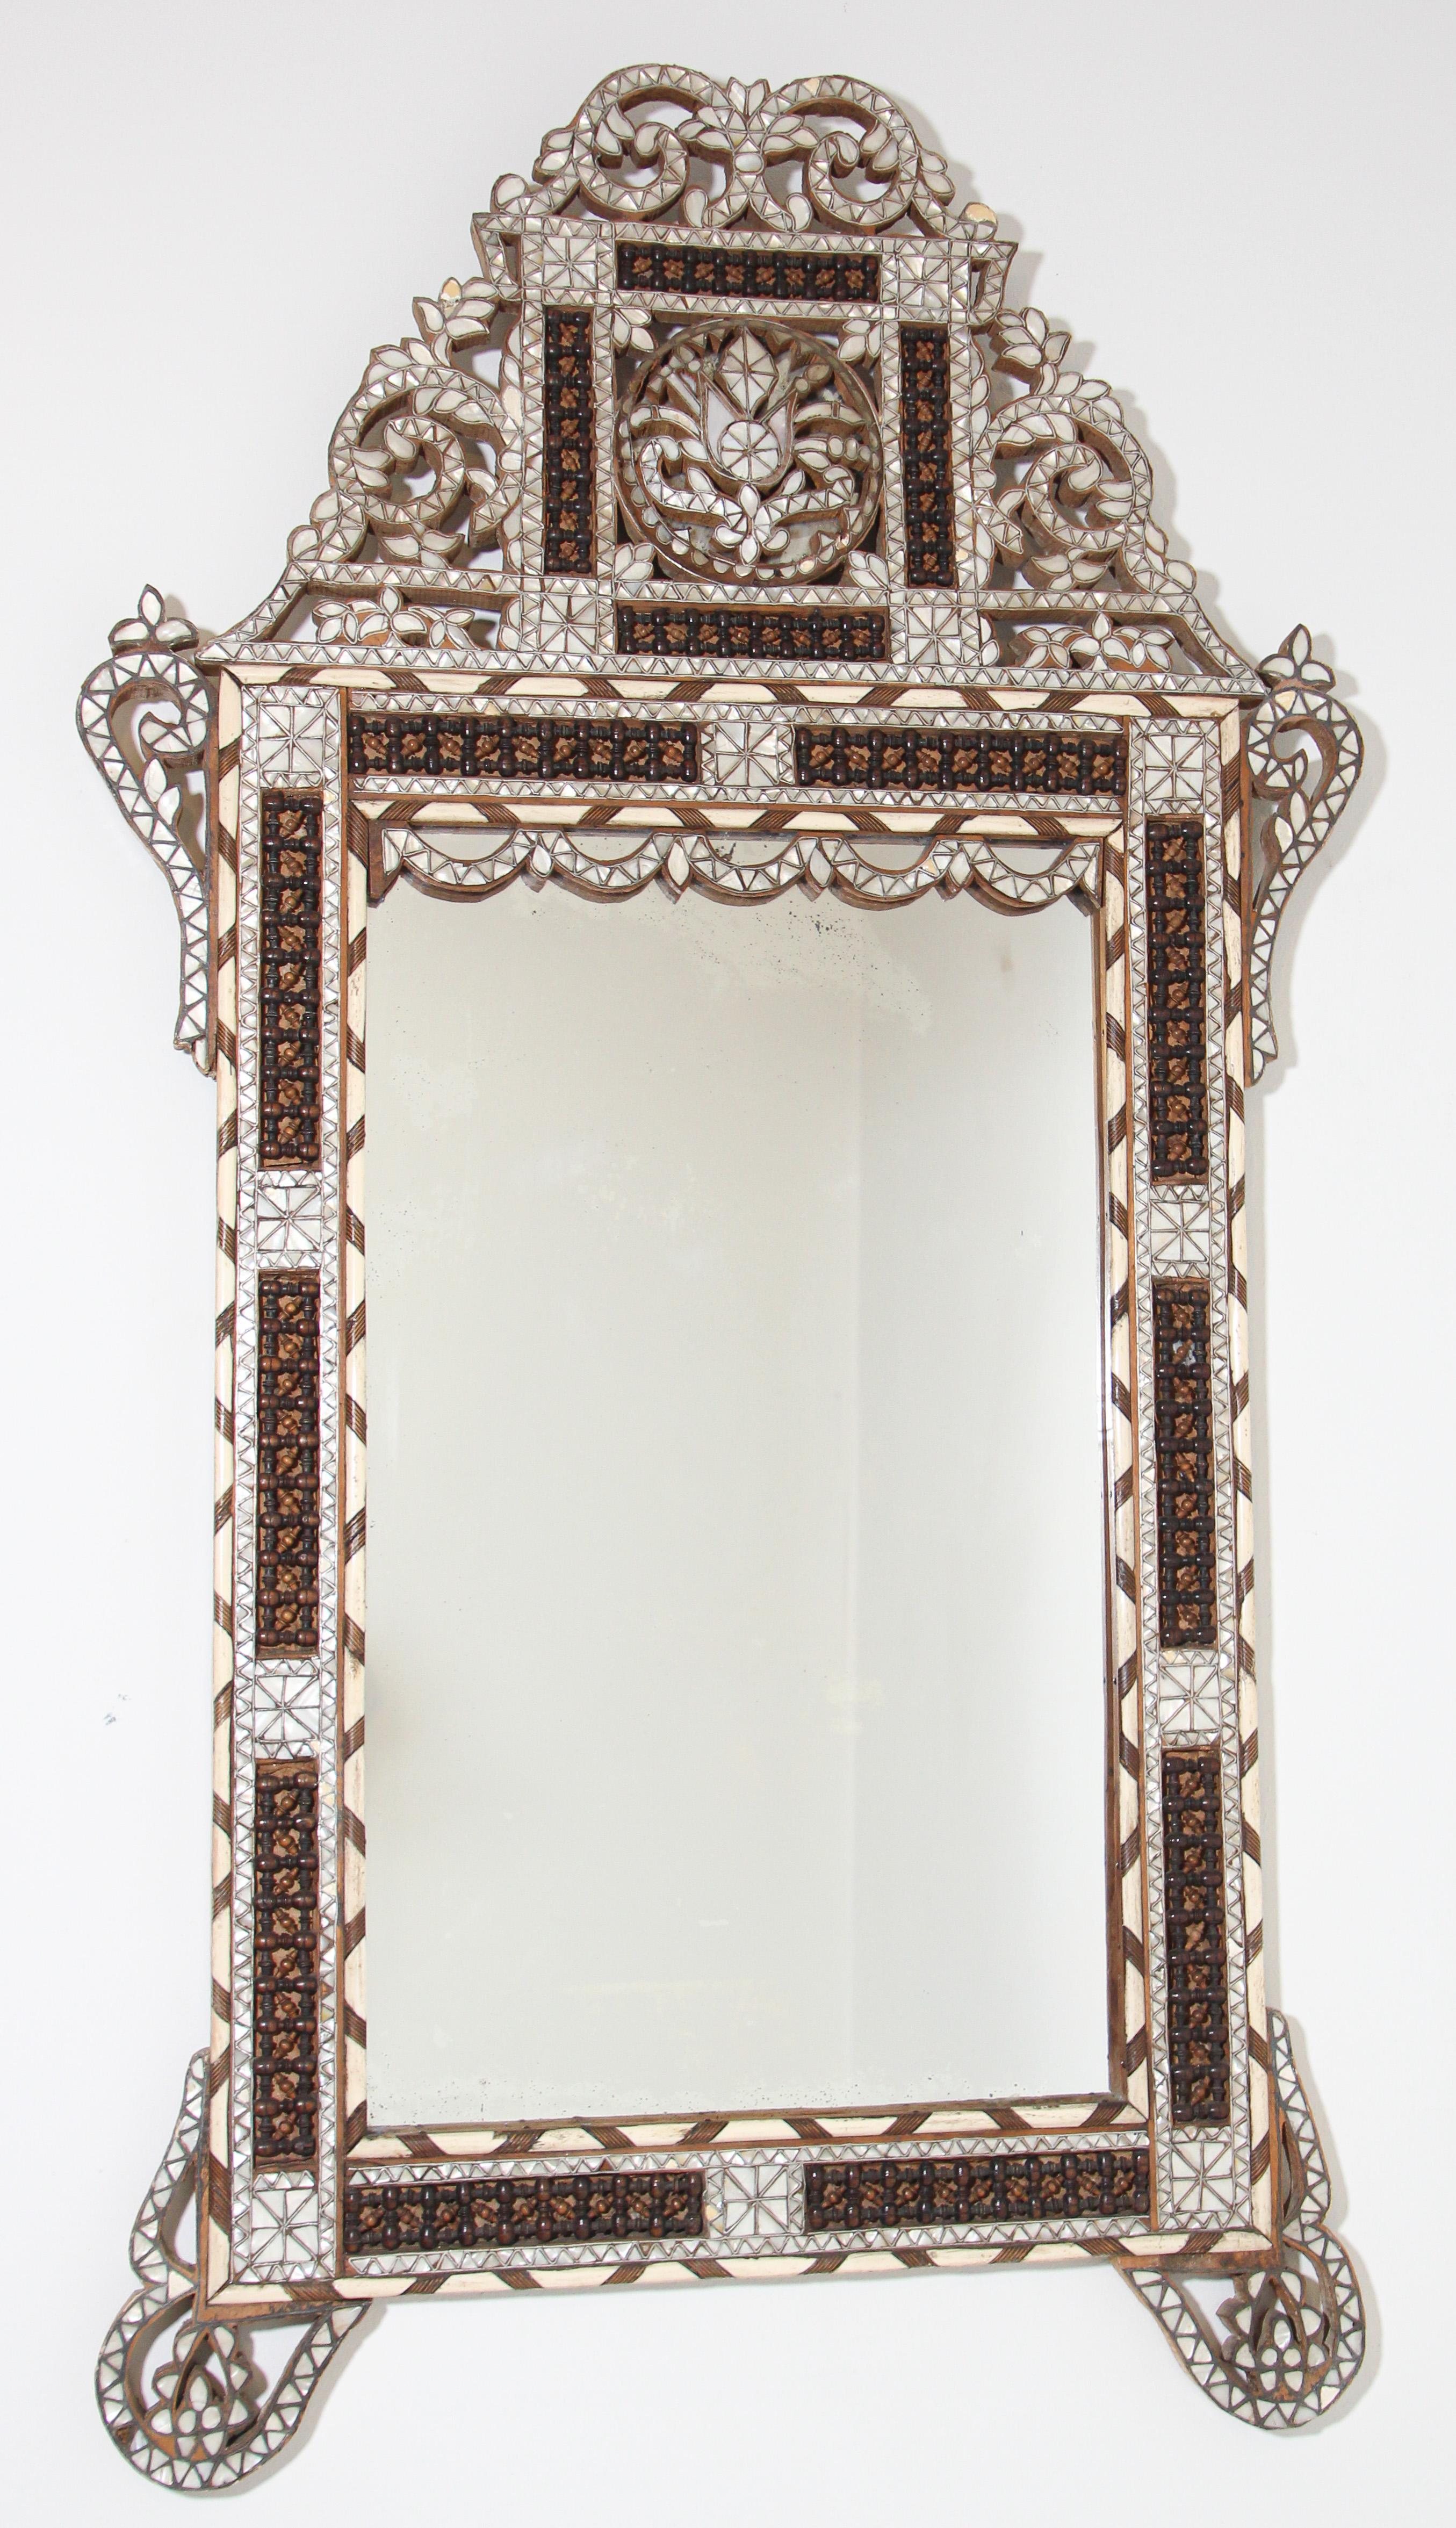 Antique Middle Eastern Moorish white mother of pearl inlaid antique mirror, late 19th century.
Antique Middle Eastern Moorish mirror in the Turkish, Syrian ottoman style.
Sensational large Levantine finely inlaid with mother of pearl, each piece of